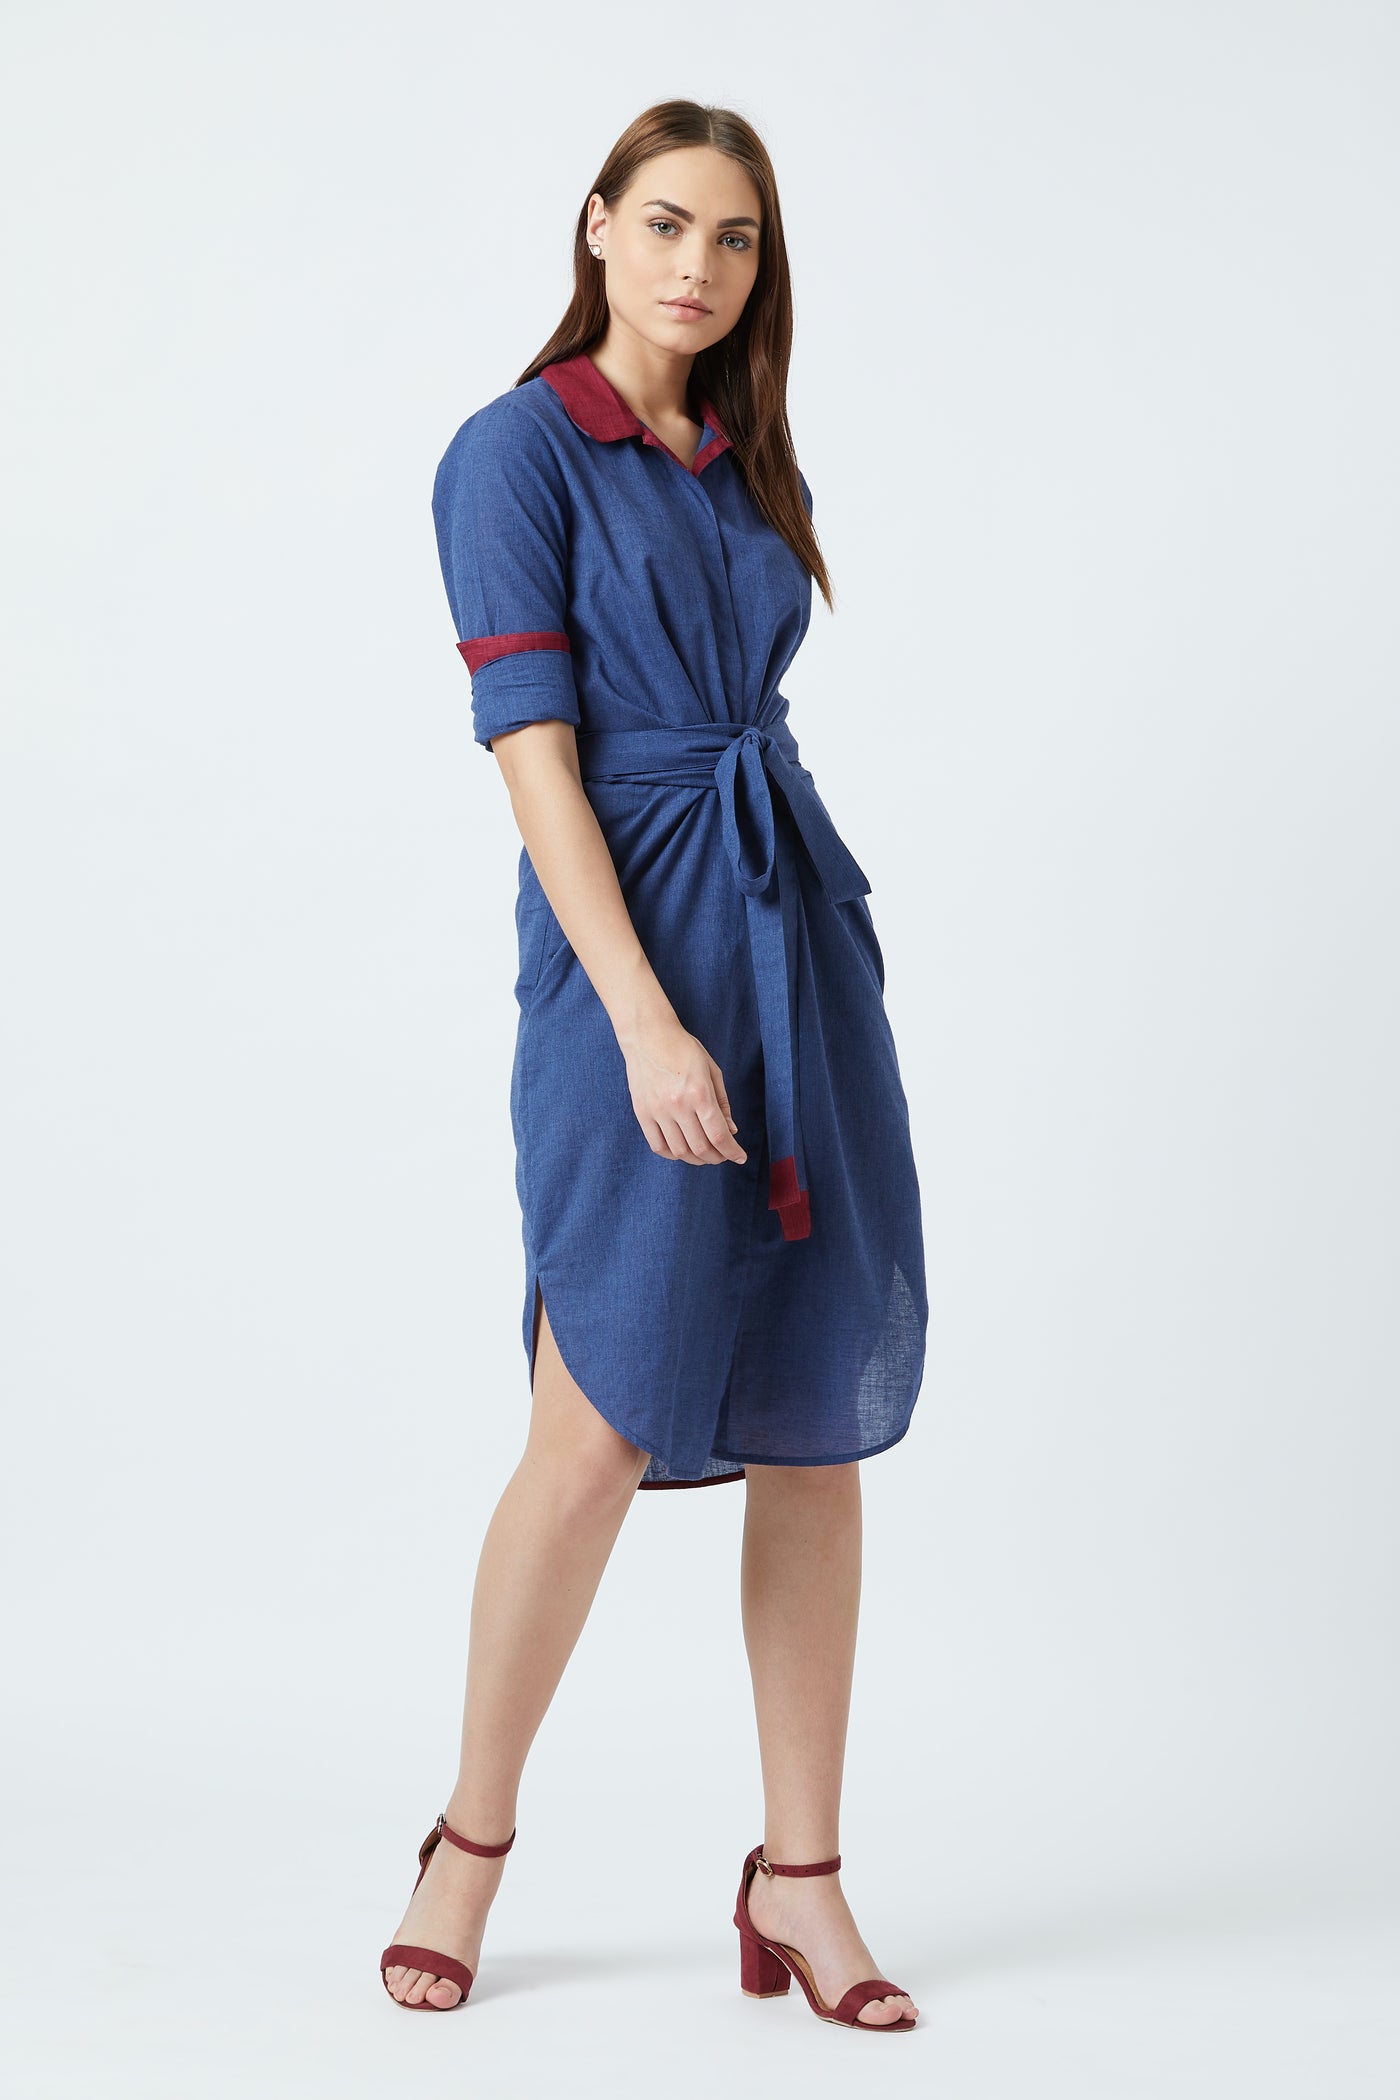 shirt dress with contrasting red collar and cuff details and side pockets